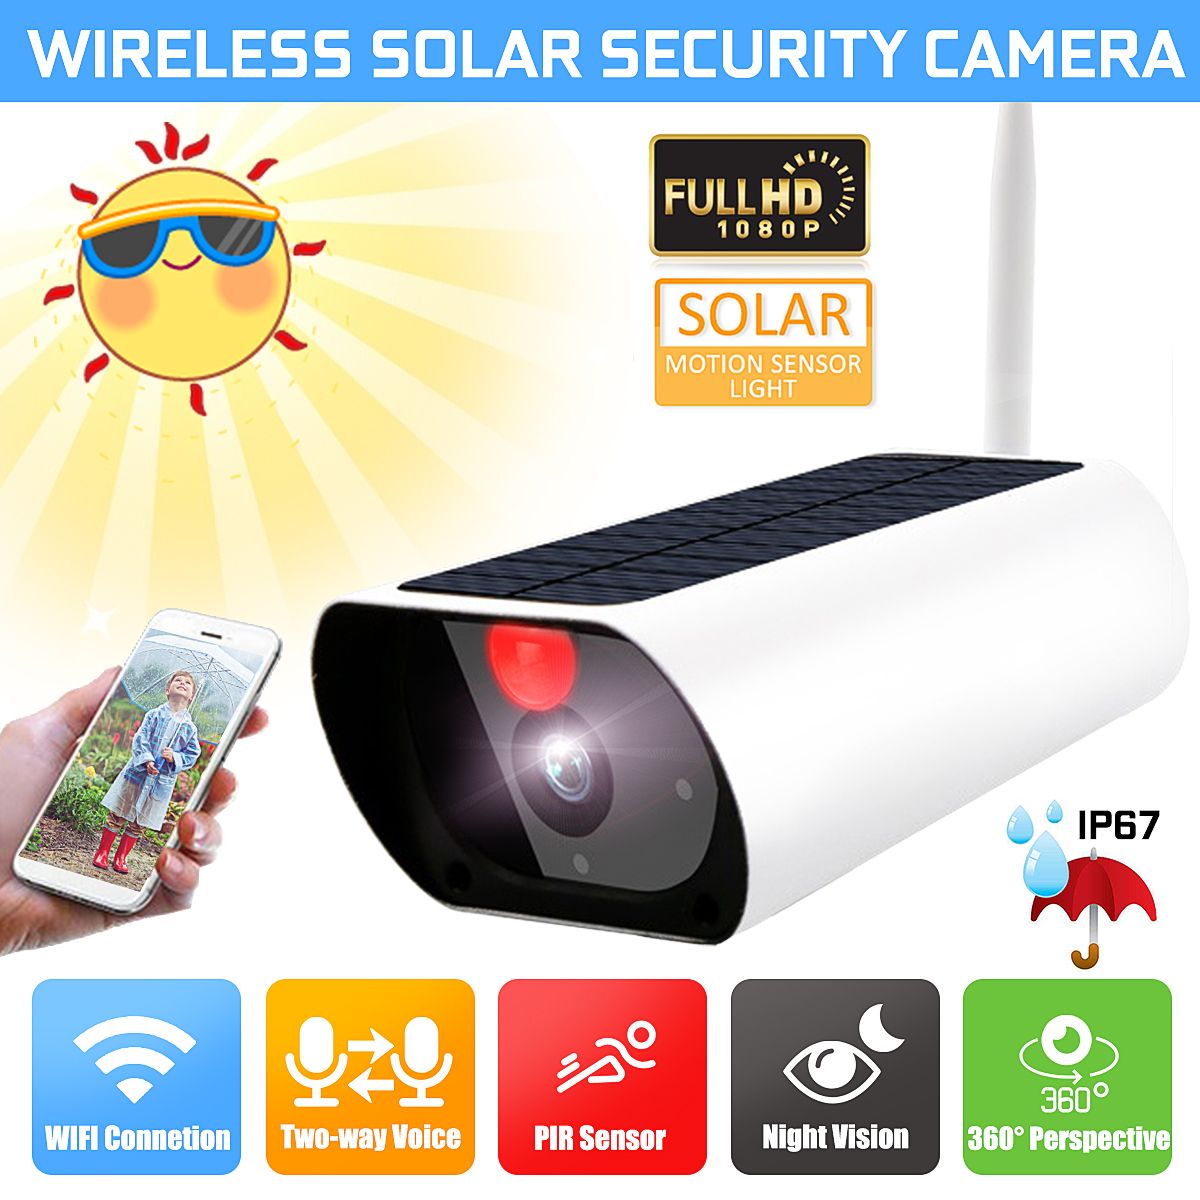 Wireless-Solar-IP-WIFI-Camera-1080P-HD-30MP-Outdoor-Security-Camera-8-infrared-Lights--Night-Vision--1559011